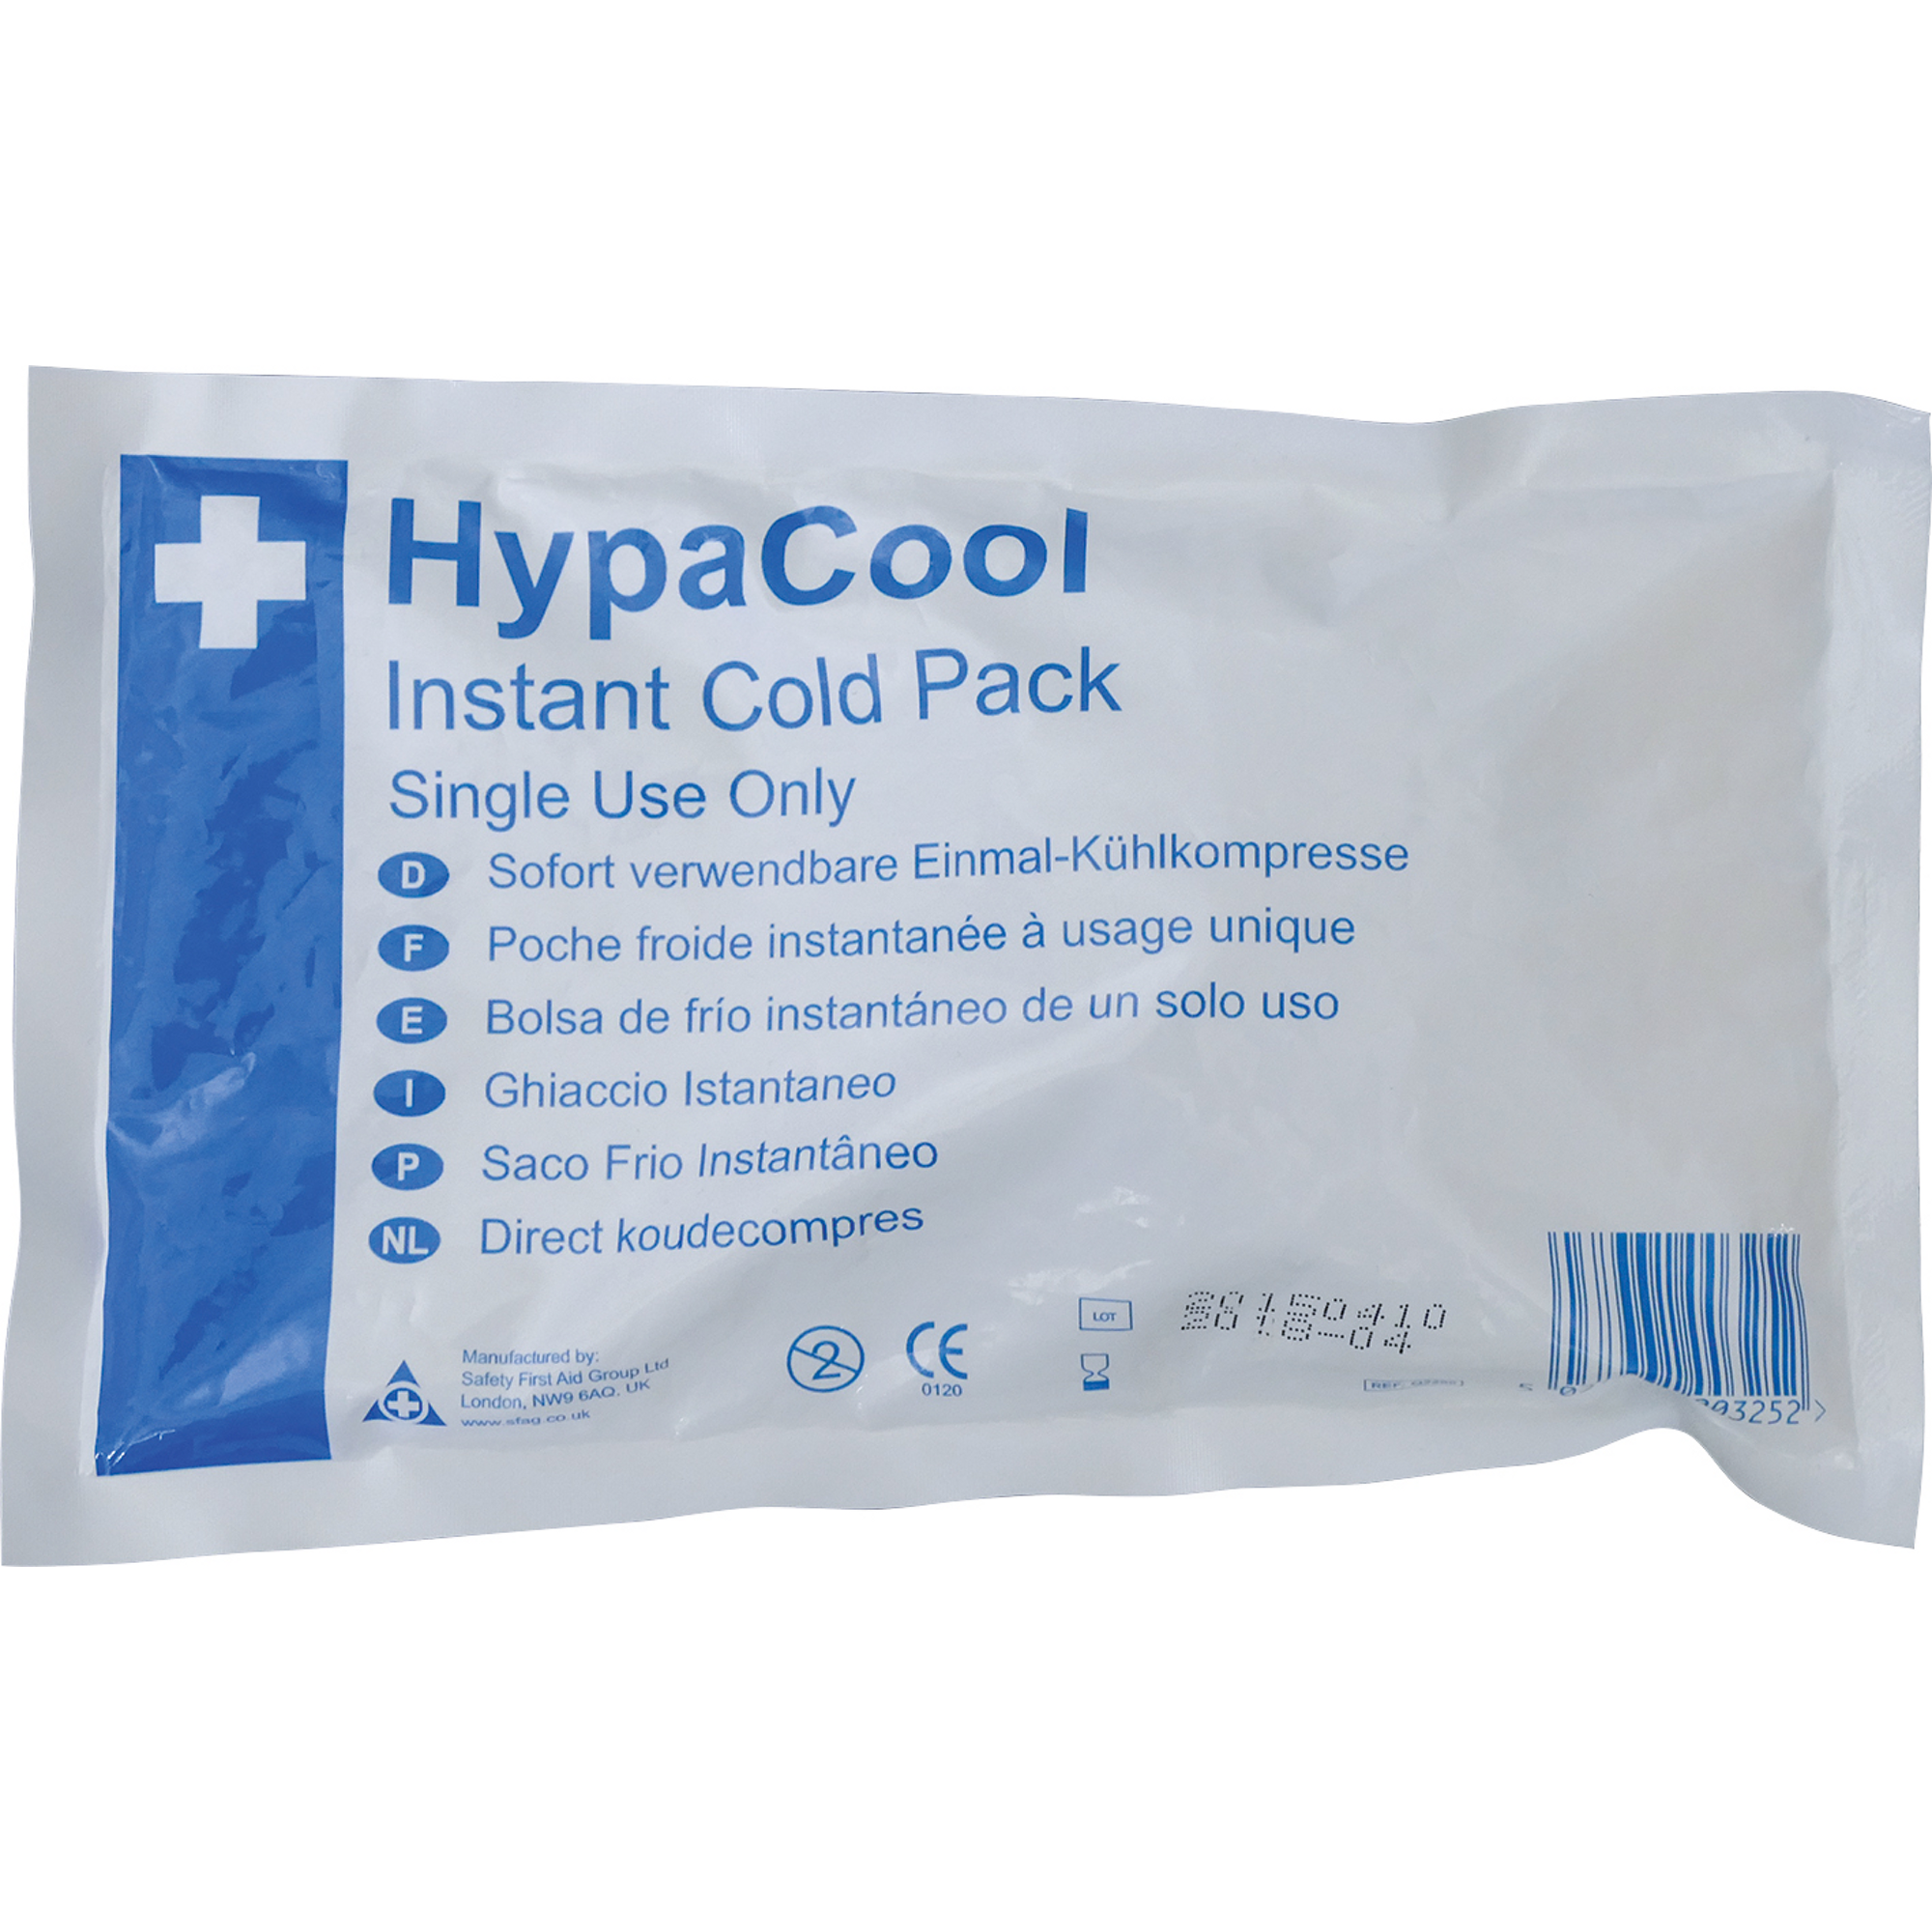 Hypacool Instant Cold Pack - Standard